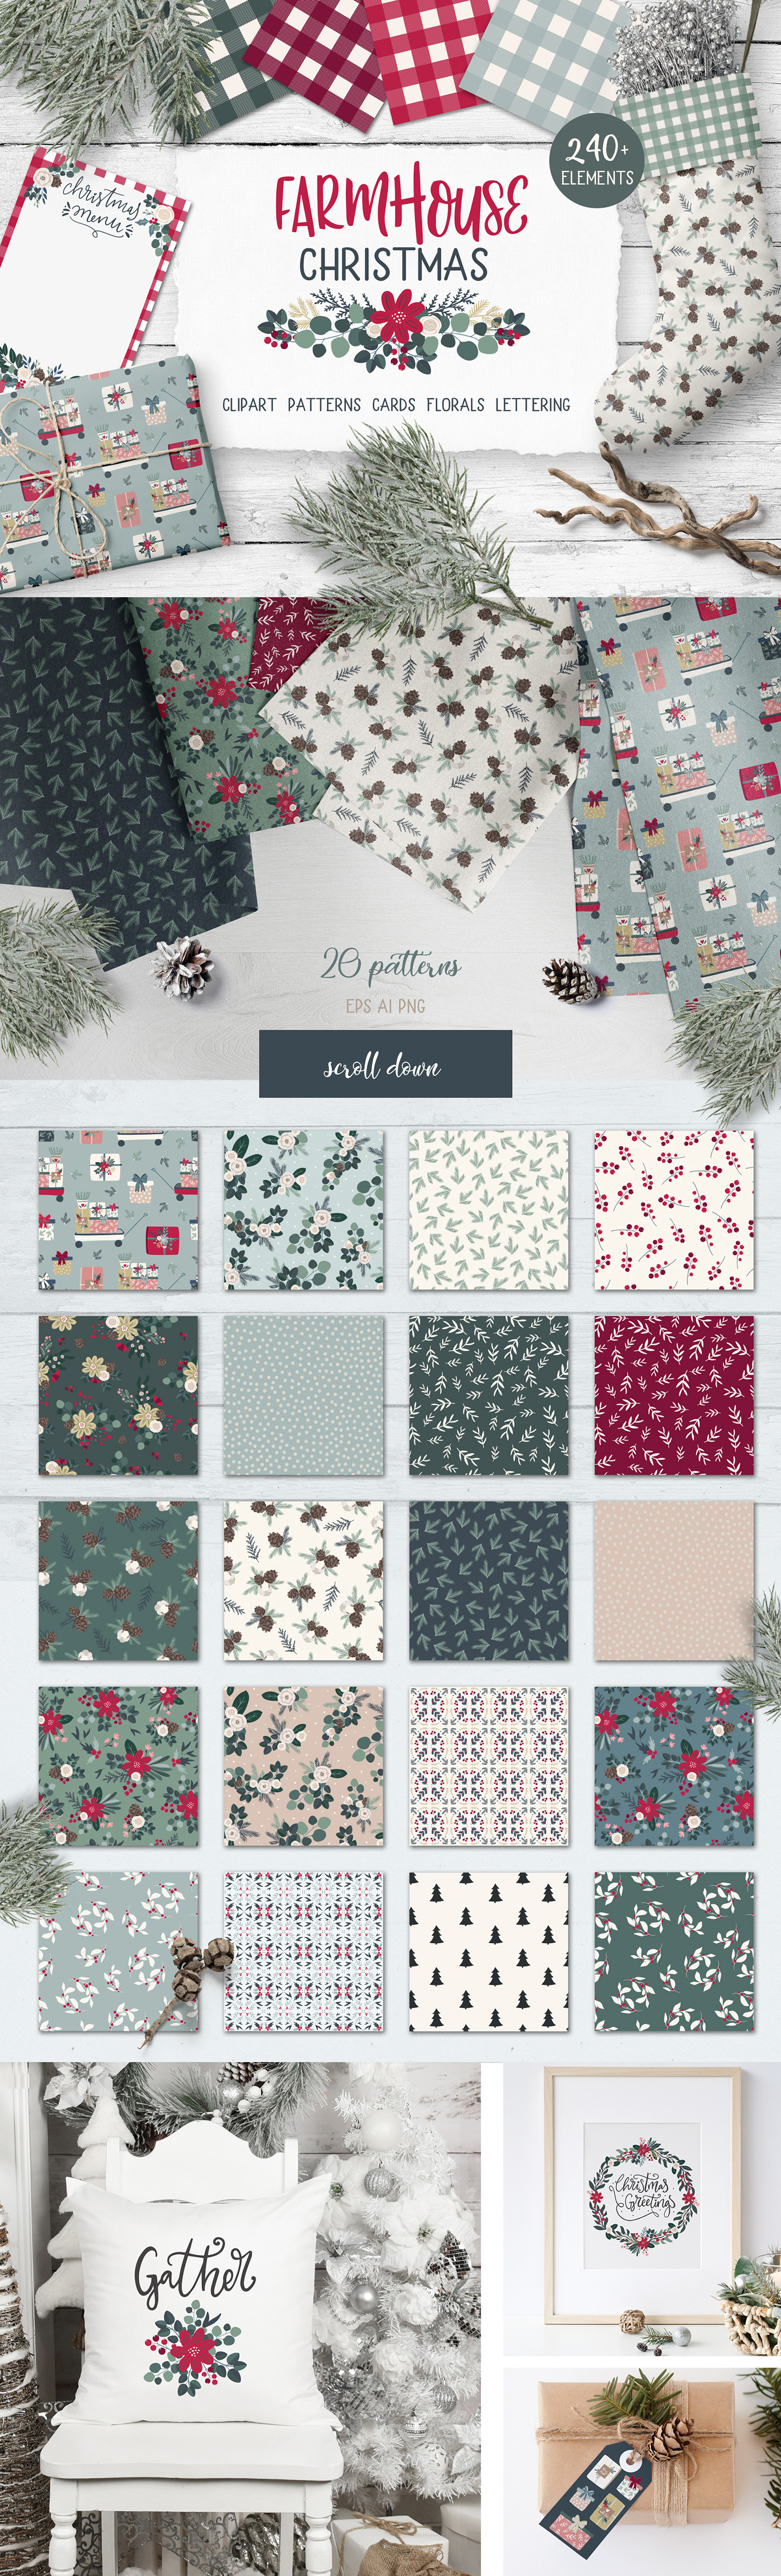 Farmhouse ILLUSTRATION  surface pattern design greeting card hand drawn clipart Christmas lettering creative market product